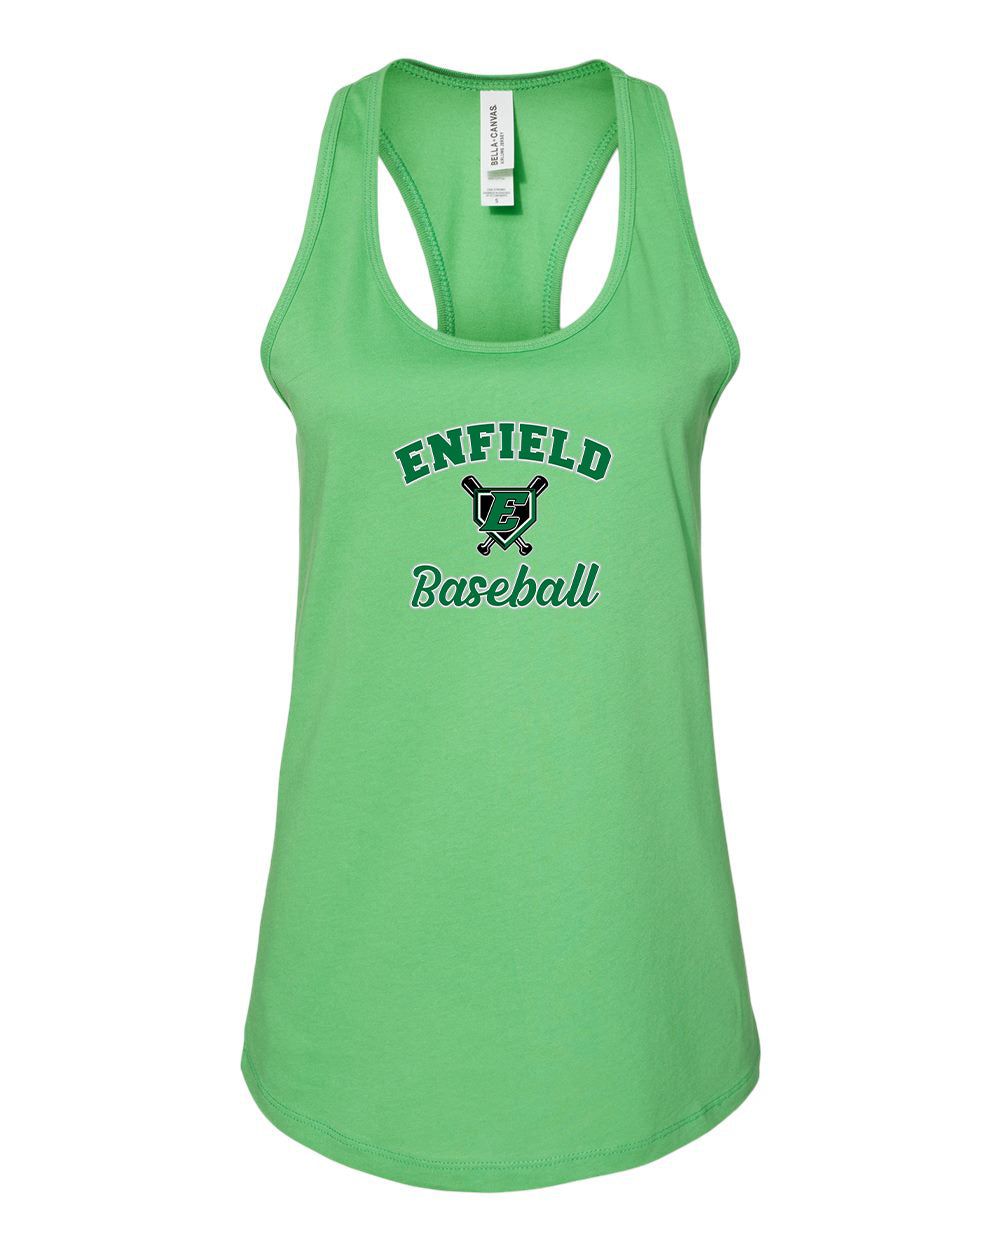 ELL Ladies Tank Top "CC Baseball" - 6008 (color options available)